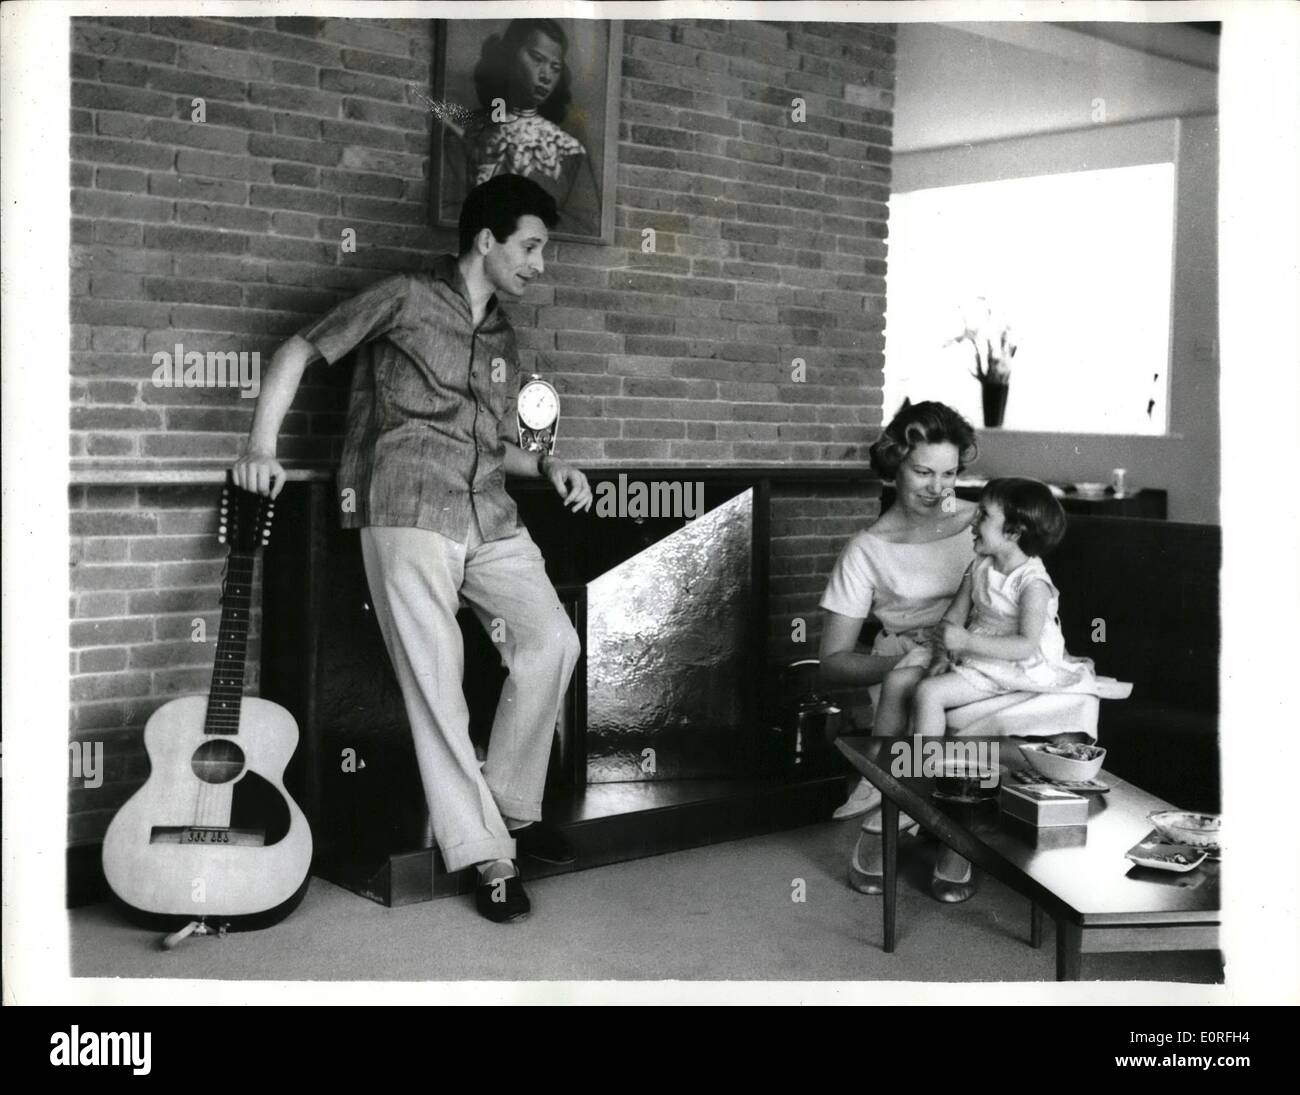 May 05, 1959 - Lonnie Donegan in New House. Photo shows Skiffle king Lonnie Donegan pictured with his wife, Maureen and their three-year old daughter Fiona in their new &pound;11,000 house on the edge of Epping Forest. Stock Photo